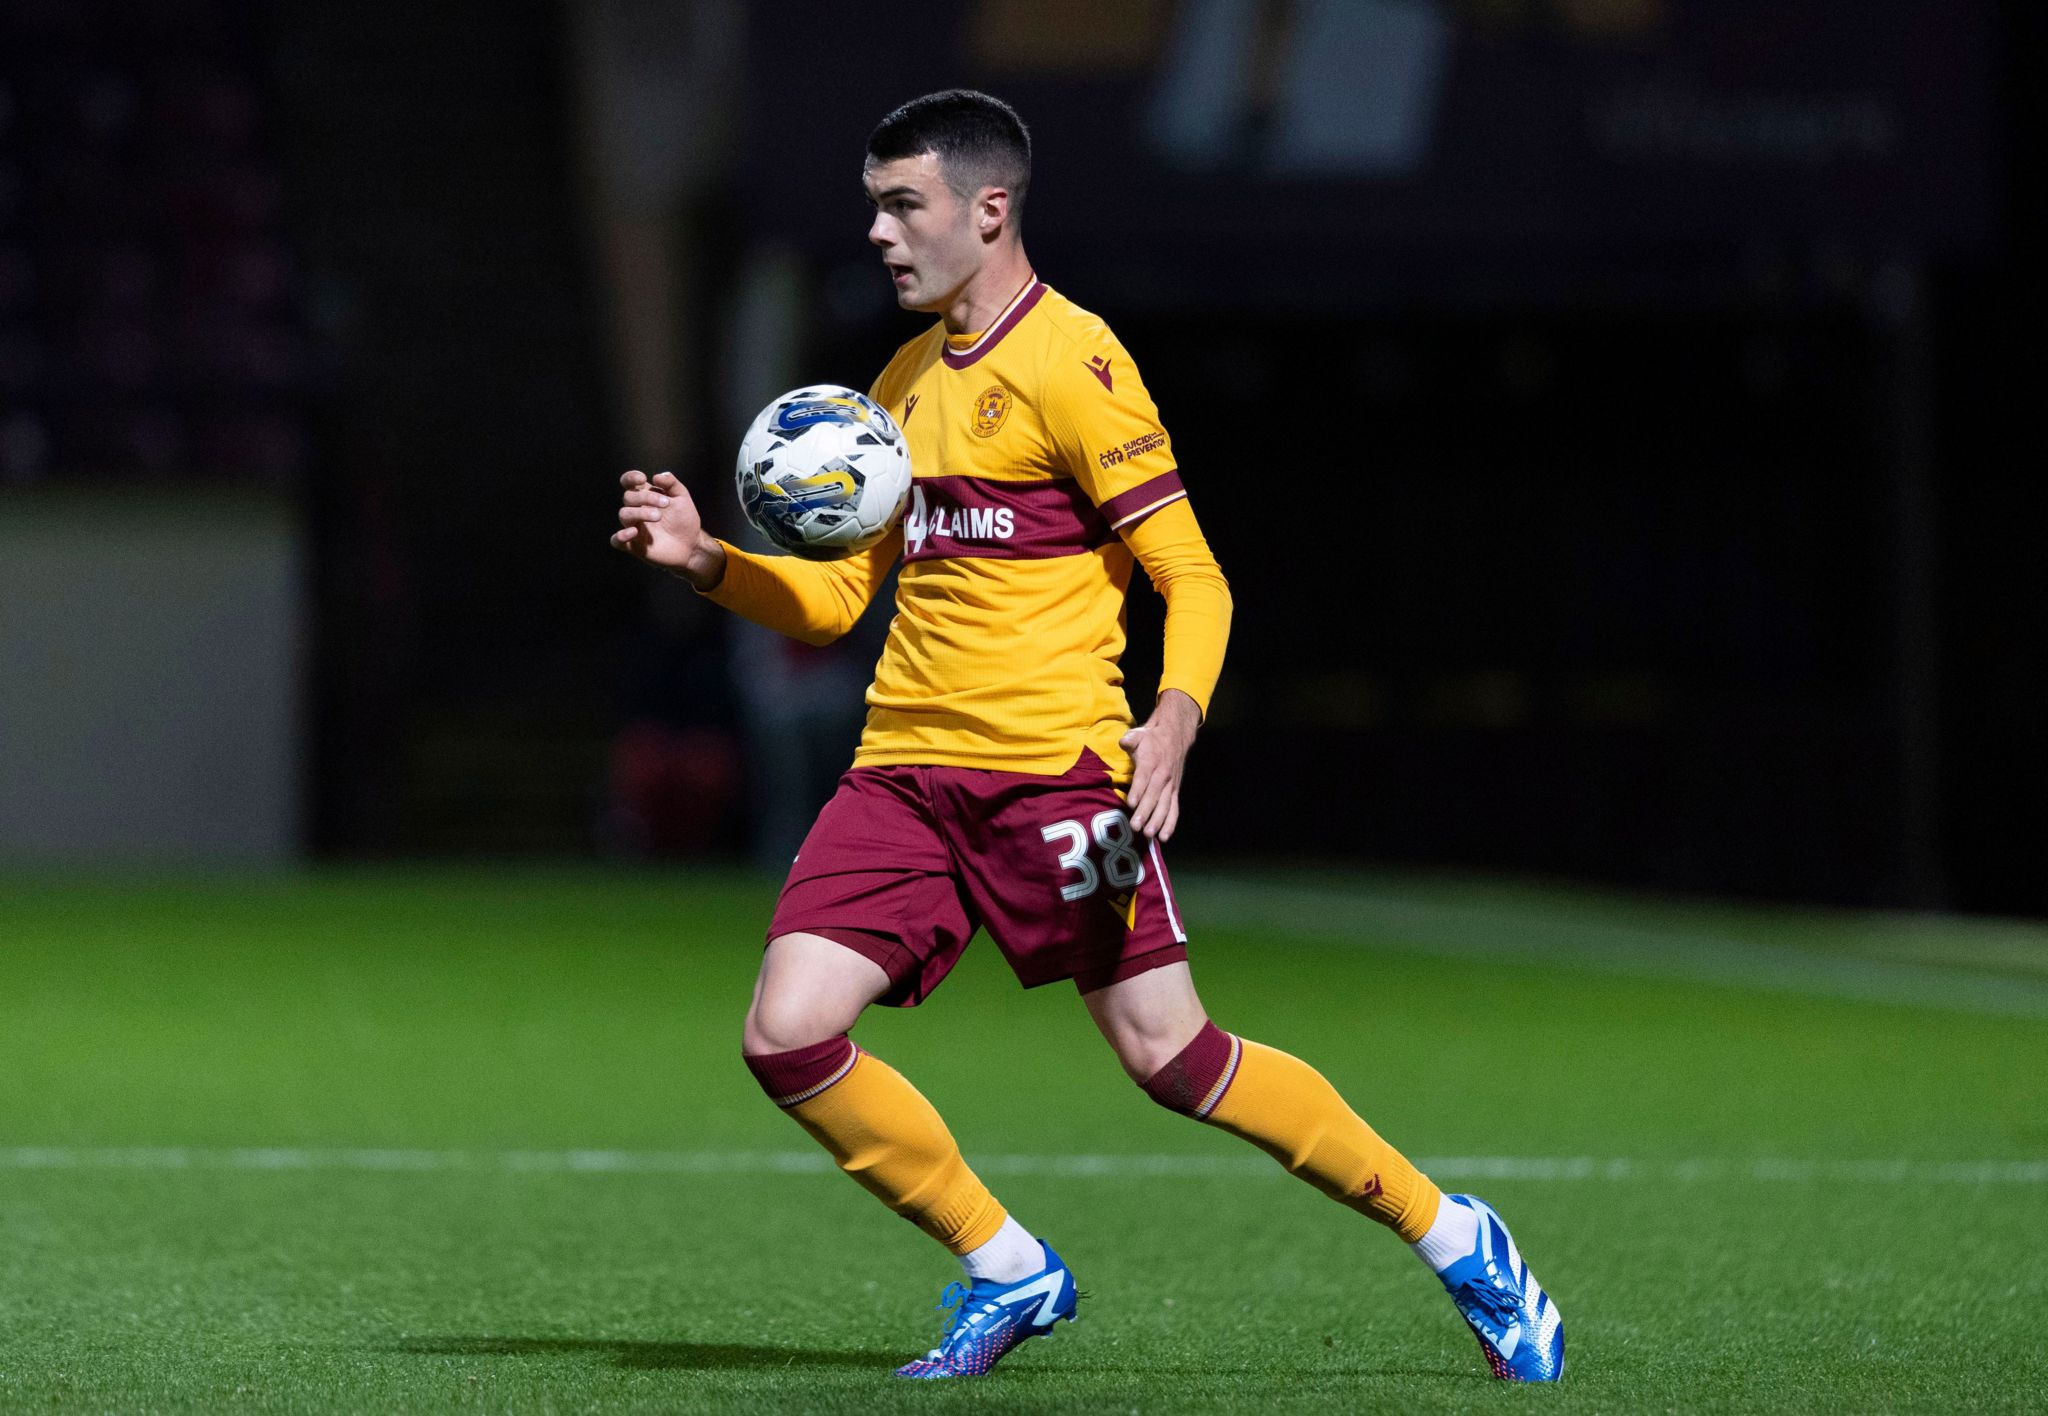 Motherwell's Lennon Miller signs new contract until 2026 - BBC Sport